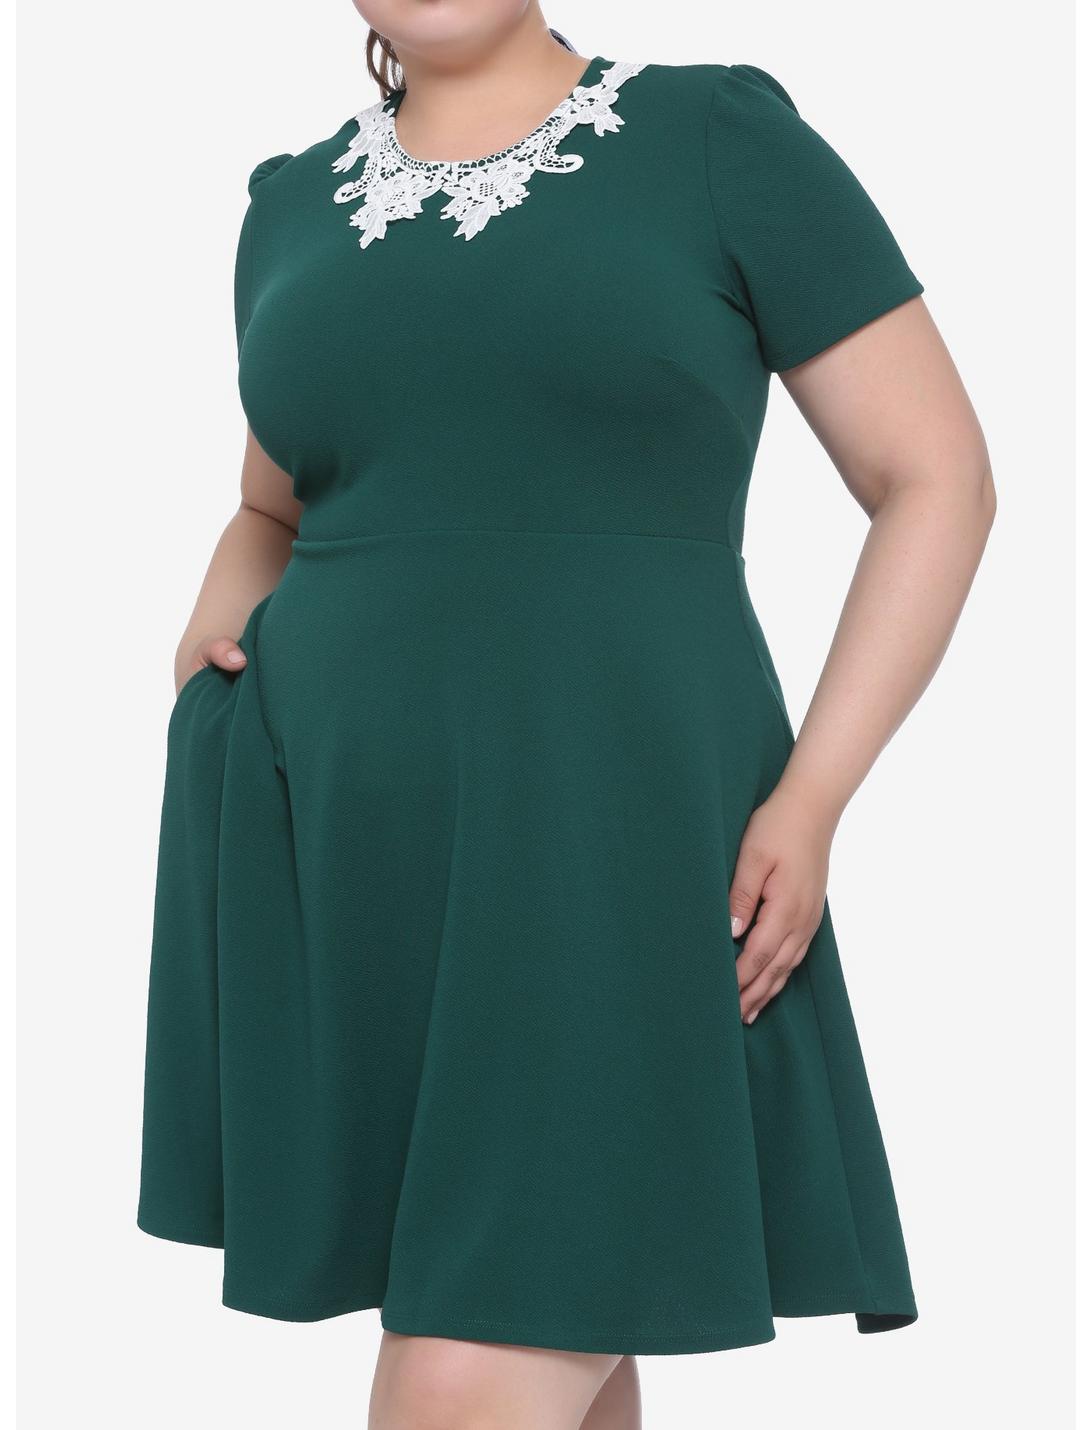 Green Lace Collar Dress Plus Size, GREEN, hi-res